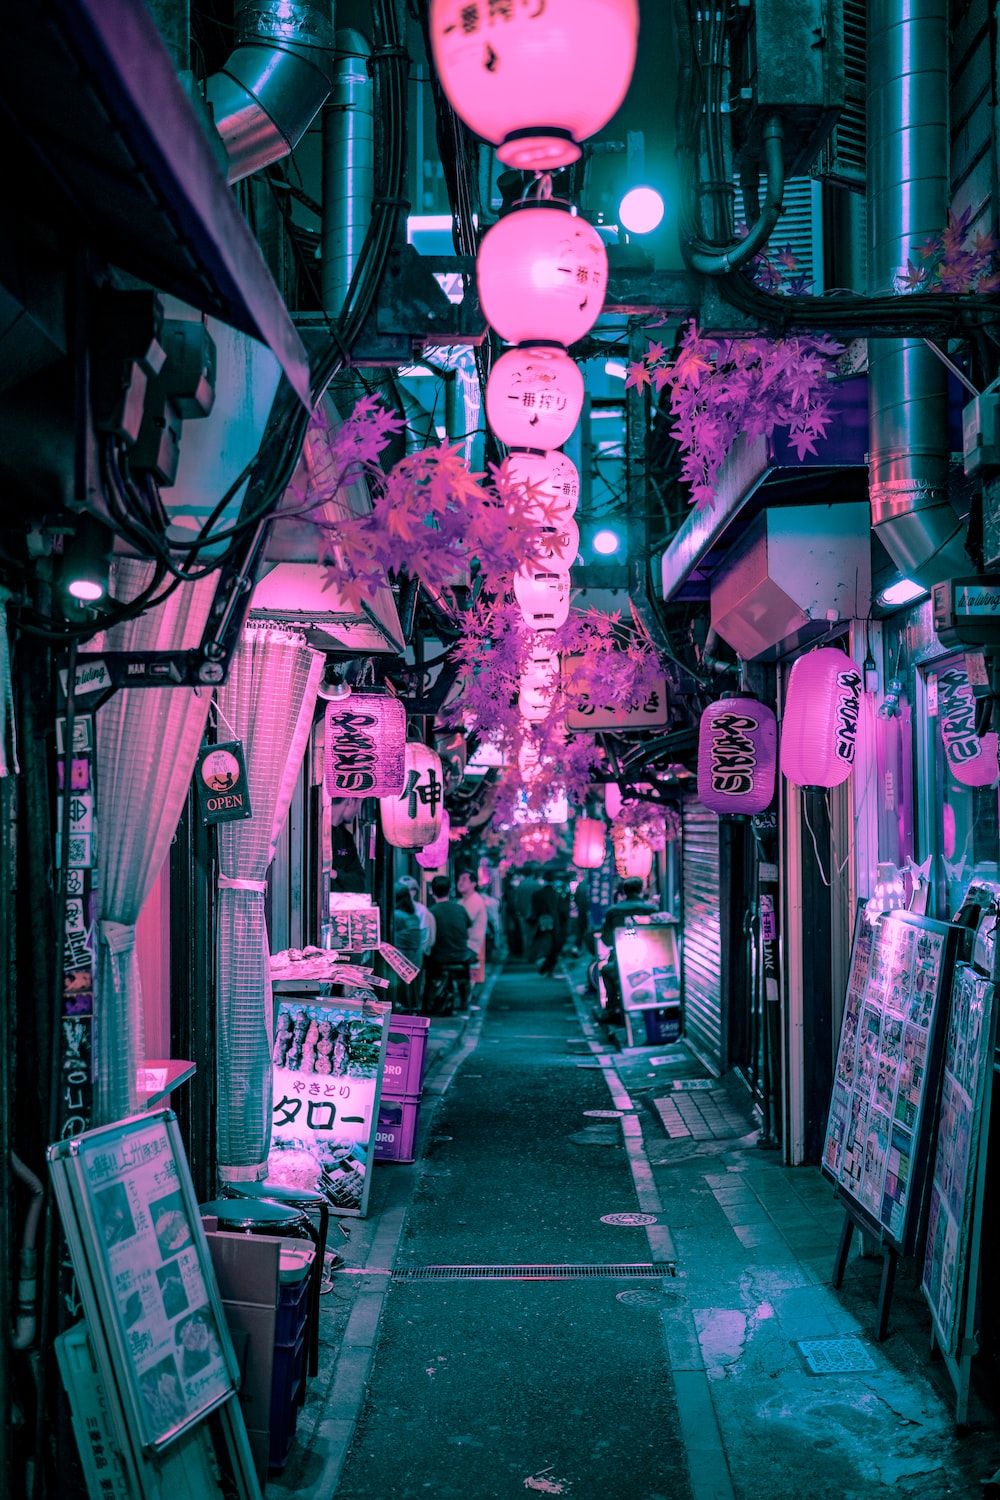 A street in Tokyo at night with pink and purple lights - Cyberpunk, city